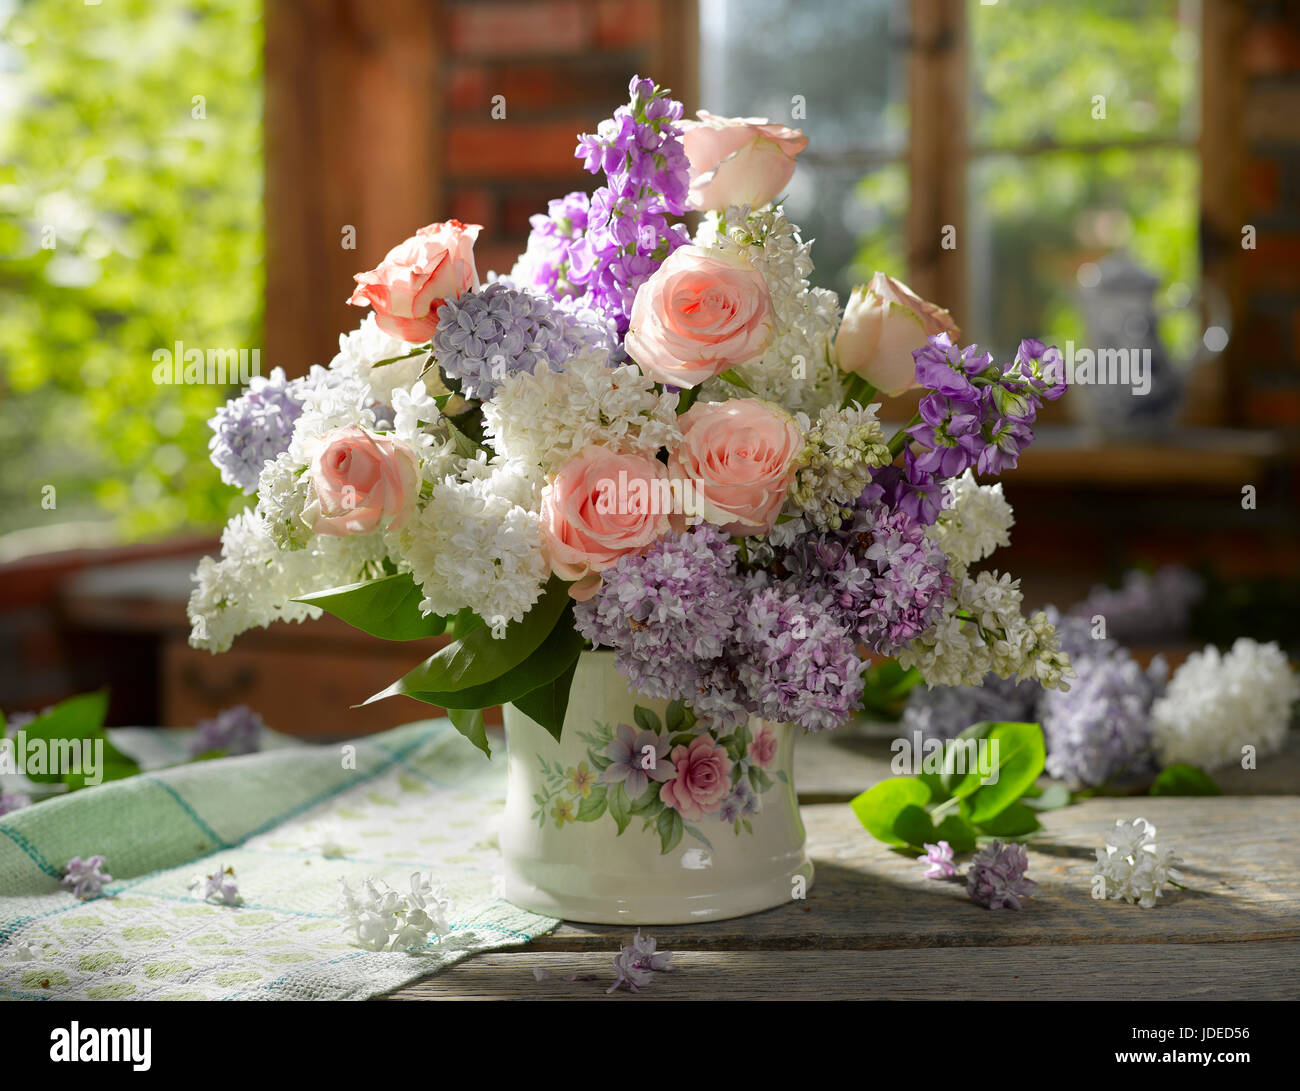 Bouquet of flowers with roses and lilacs. Stock Photo